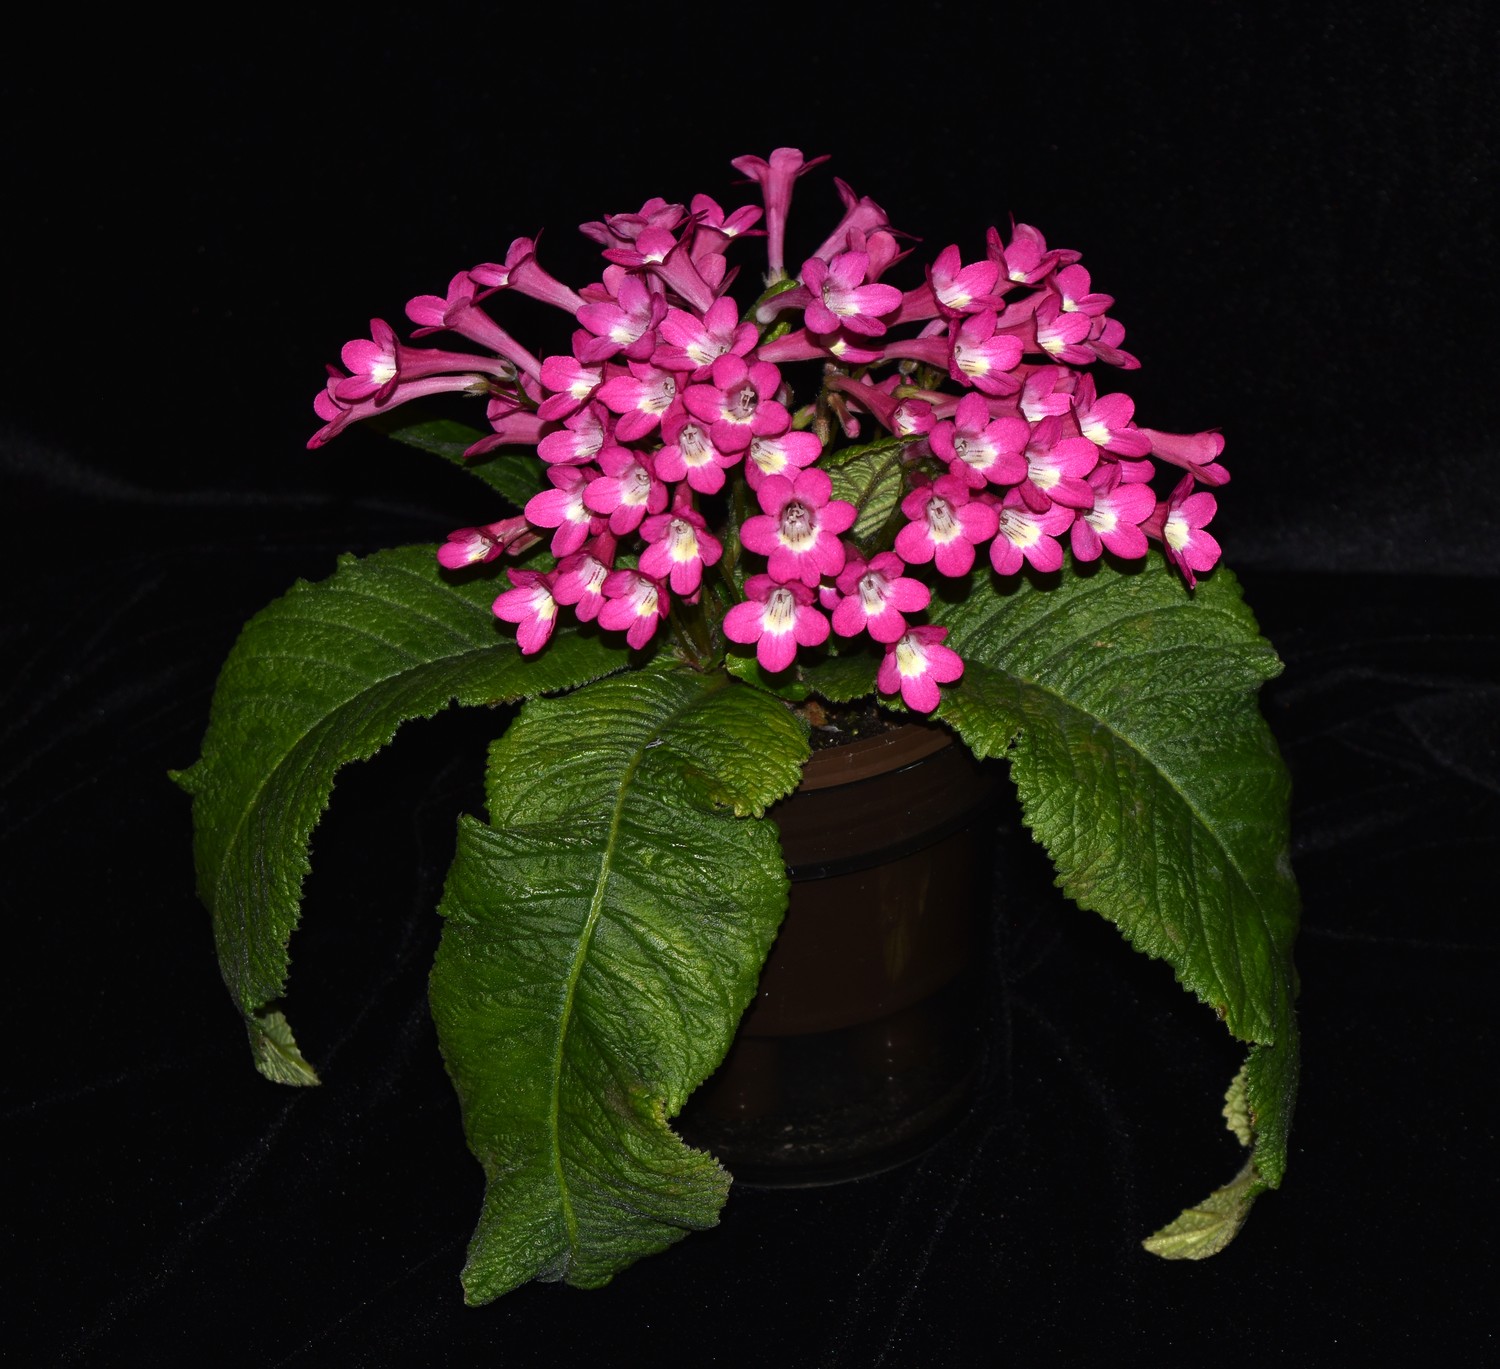 Streptocarpus ‘Dale’s Ring of Fire’ | Gesneriad Reference Web